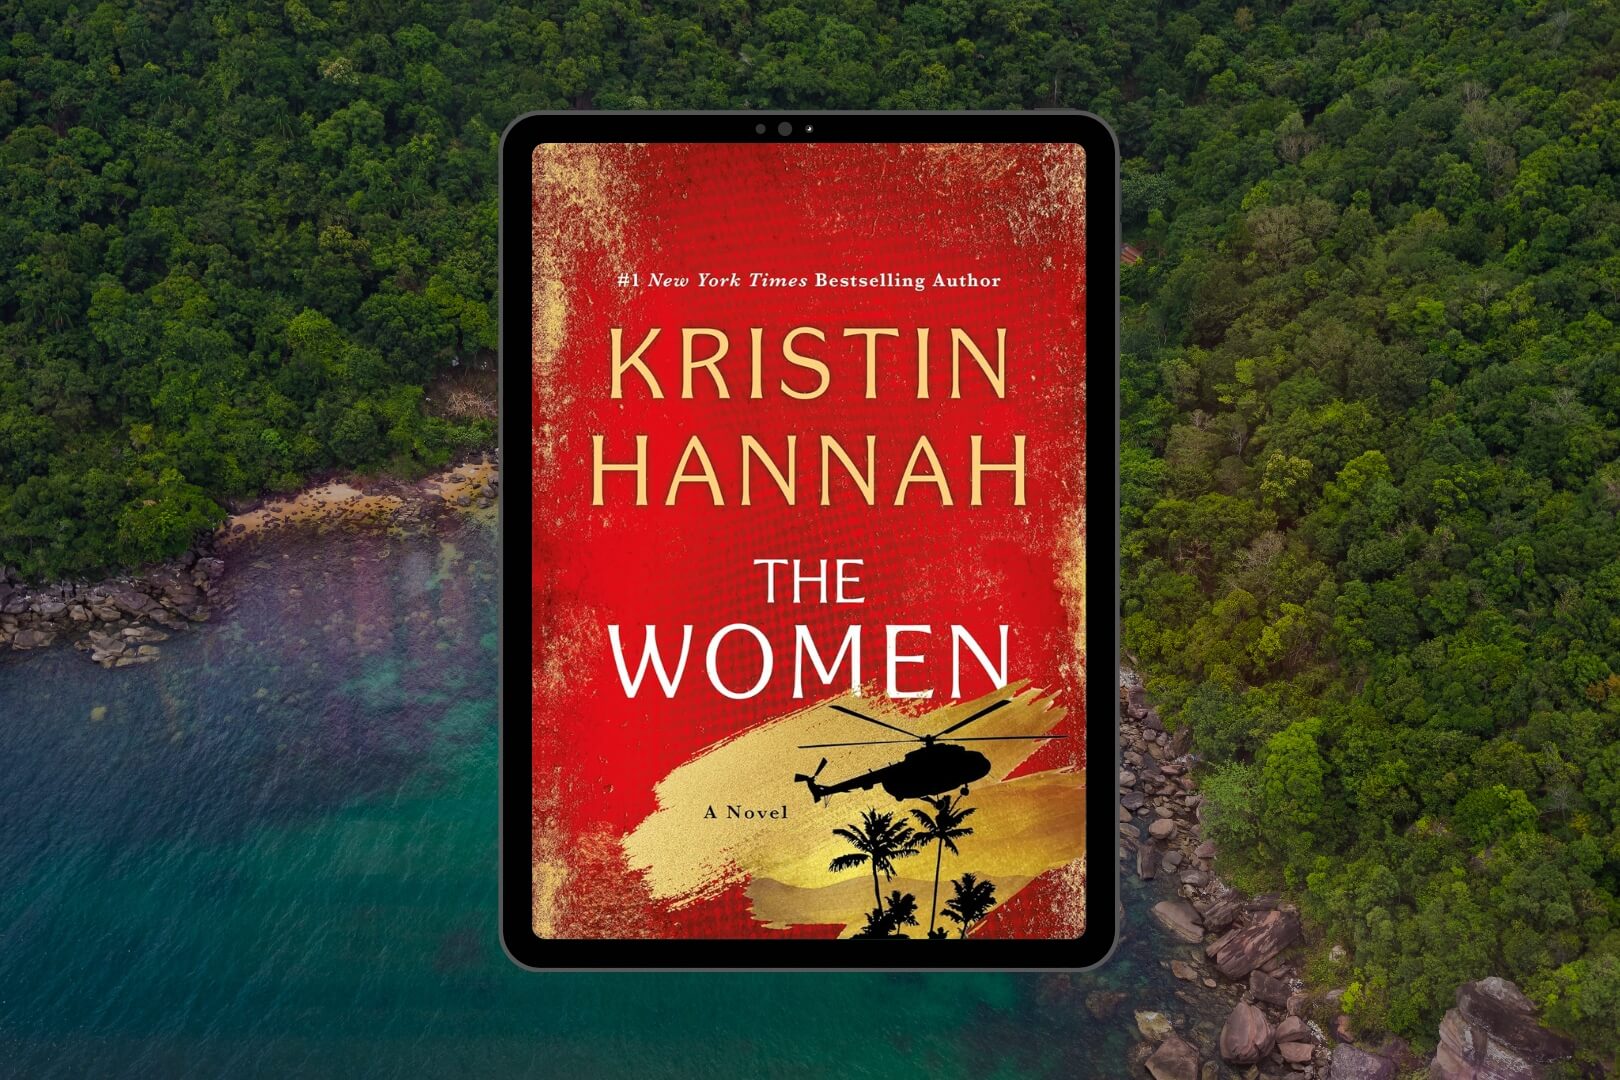 Book Club Questions for The Women by Kristin Hannah